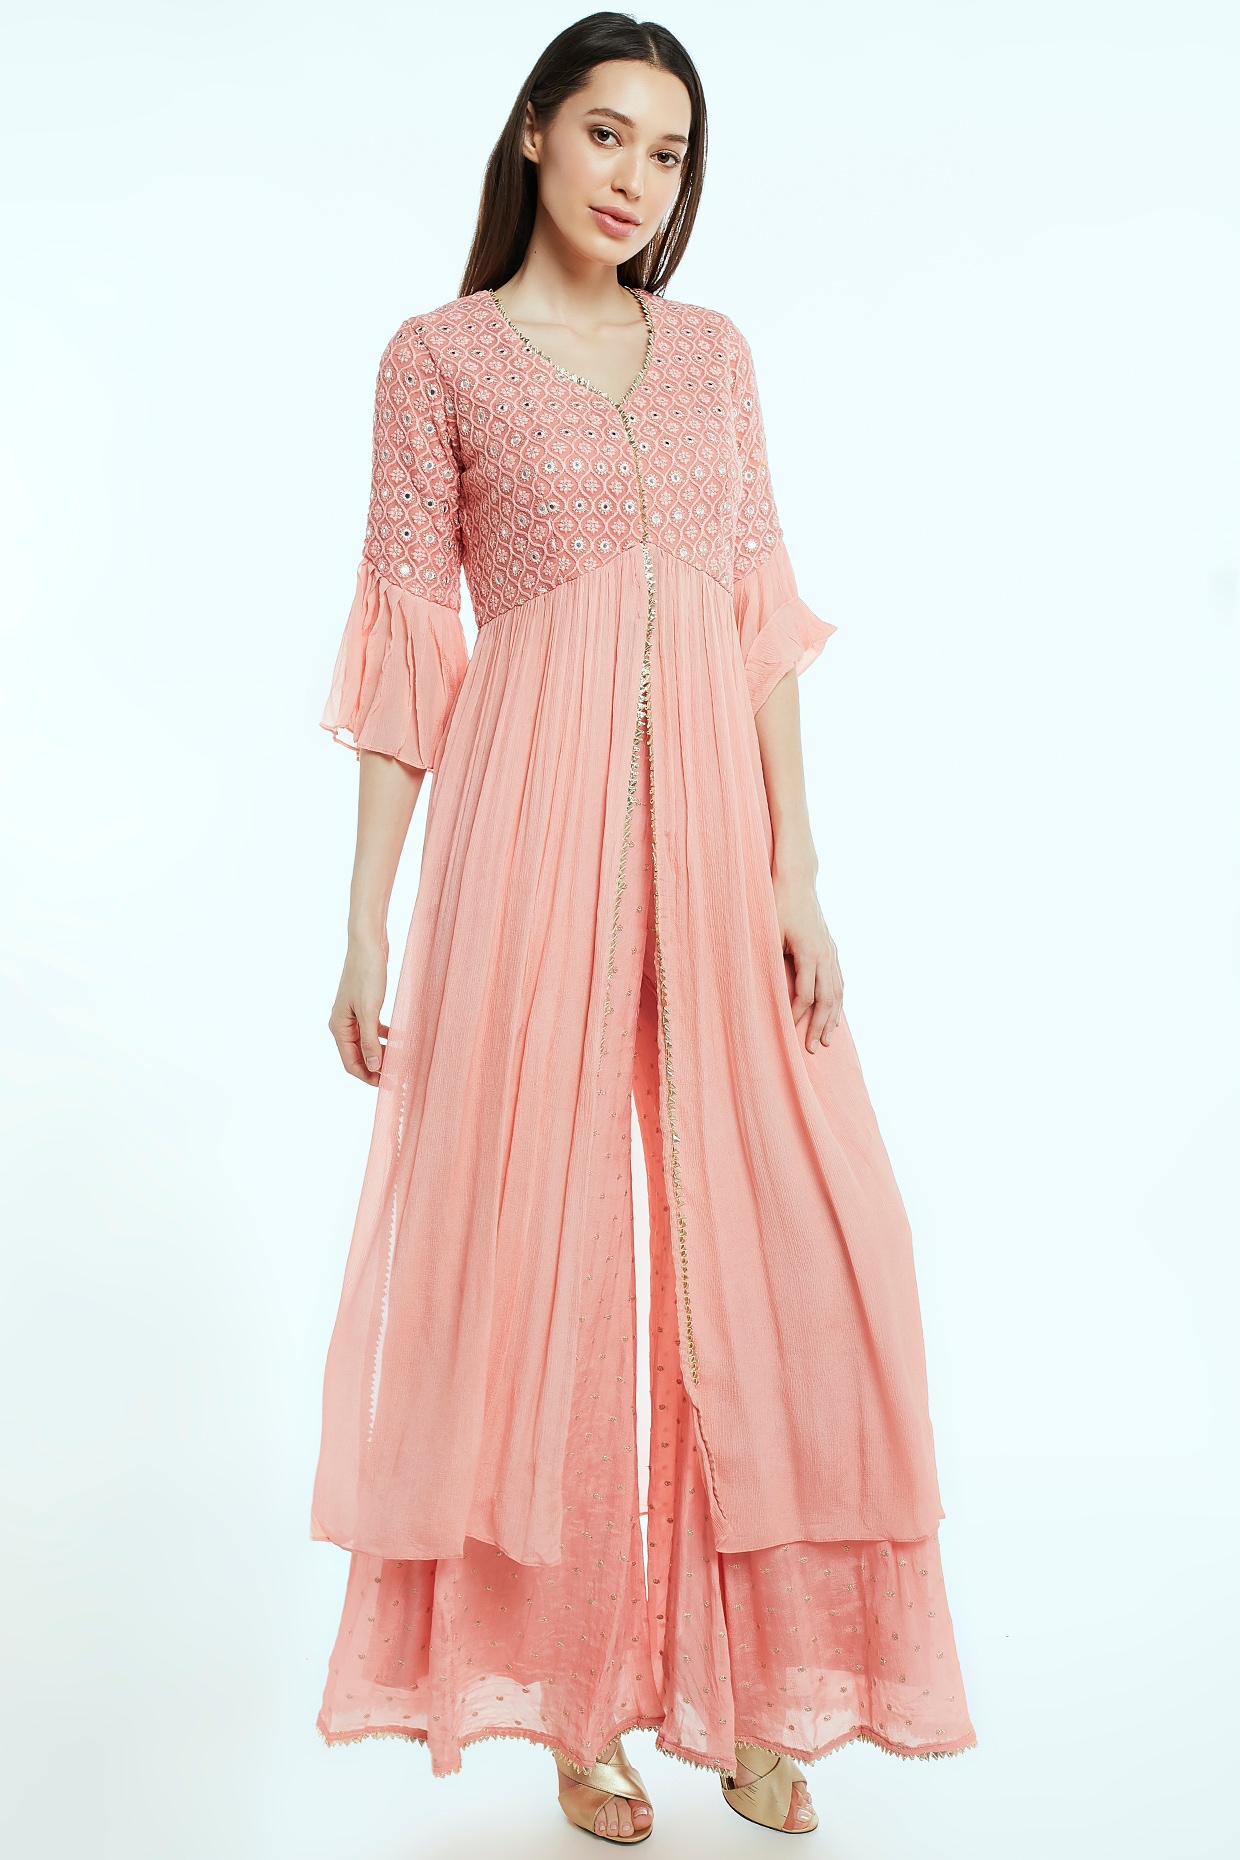 Buy Online Printed Cotton Cream and Pink Casual Kurti  124996 